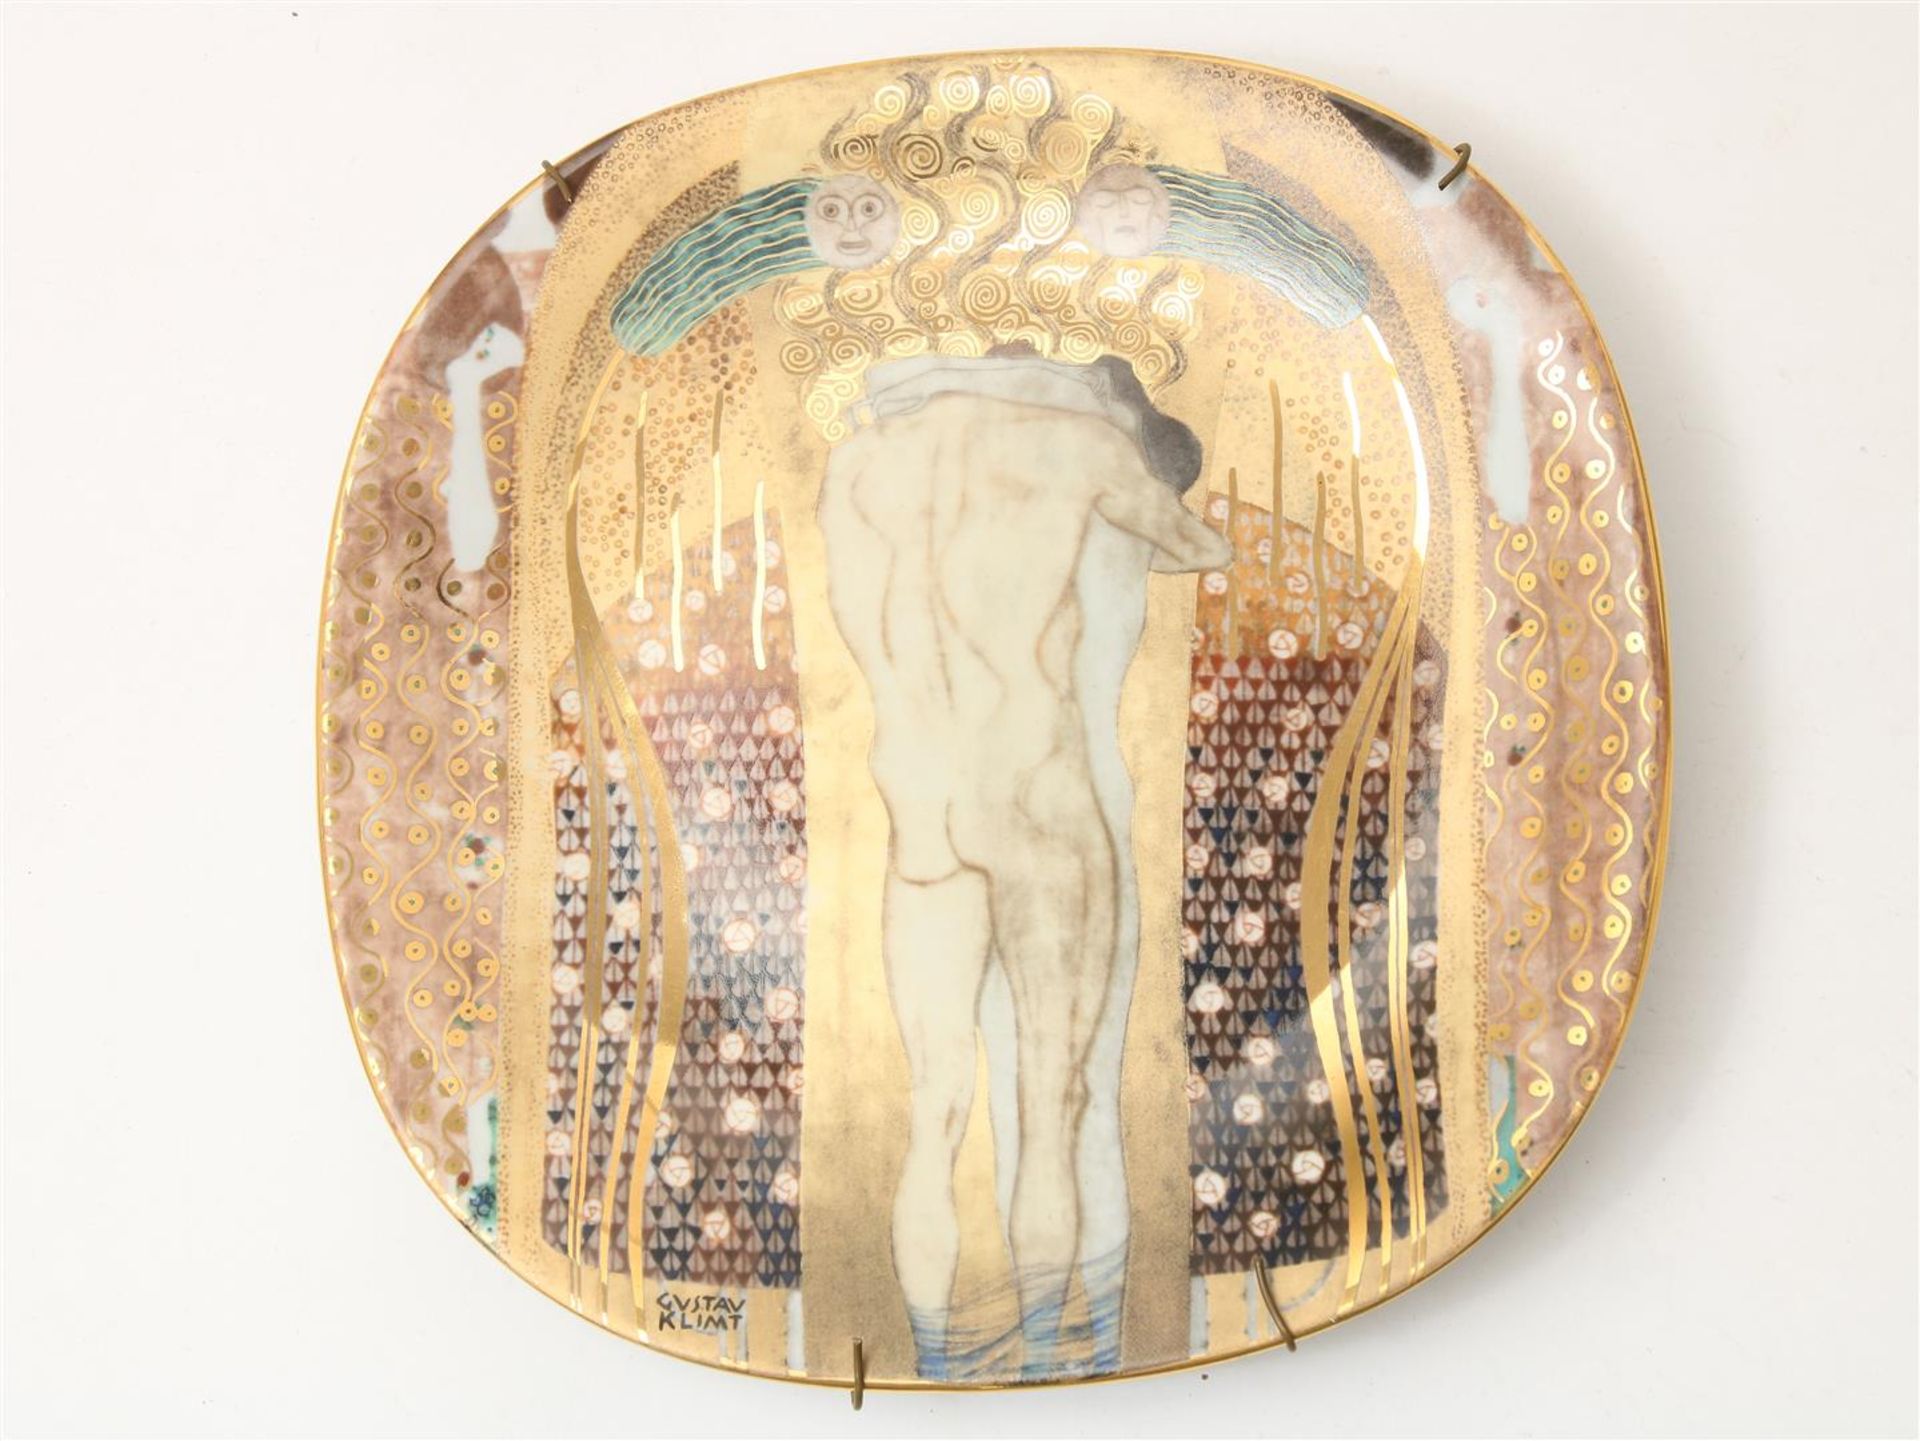 Series of 7 plates with images of the painter Gustav Klimt, Lilien porzellan, "Phantastic - Image 16 of 18